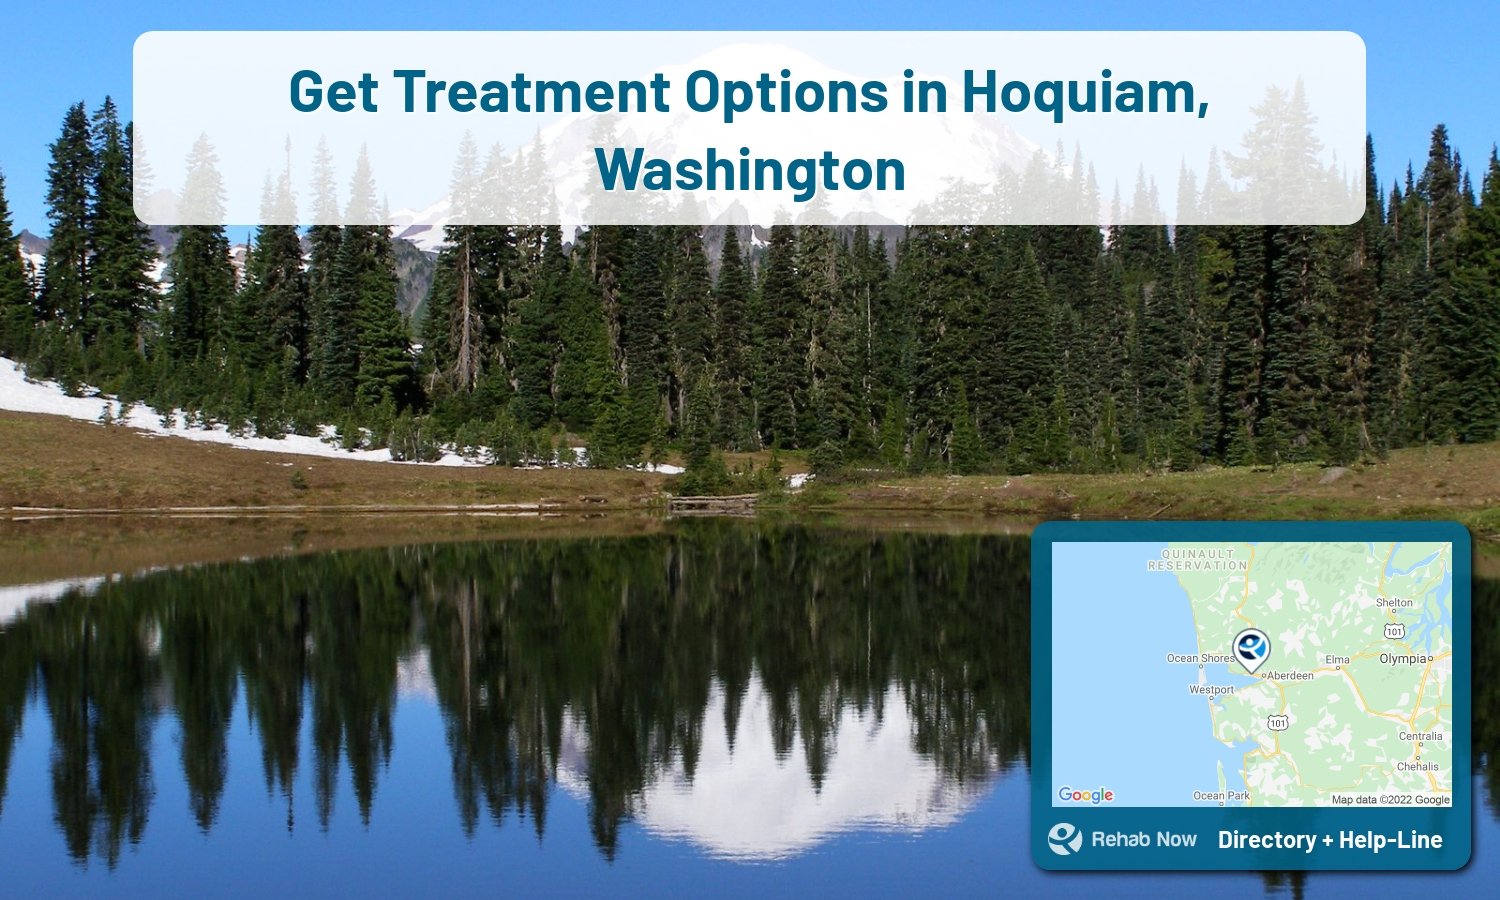 List of alcohol and drug treatment centers near you in Hoquiam, Washington. Research certifications, programs, methods, pricing, and more.